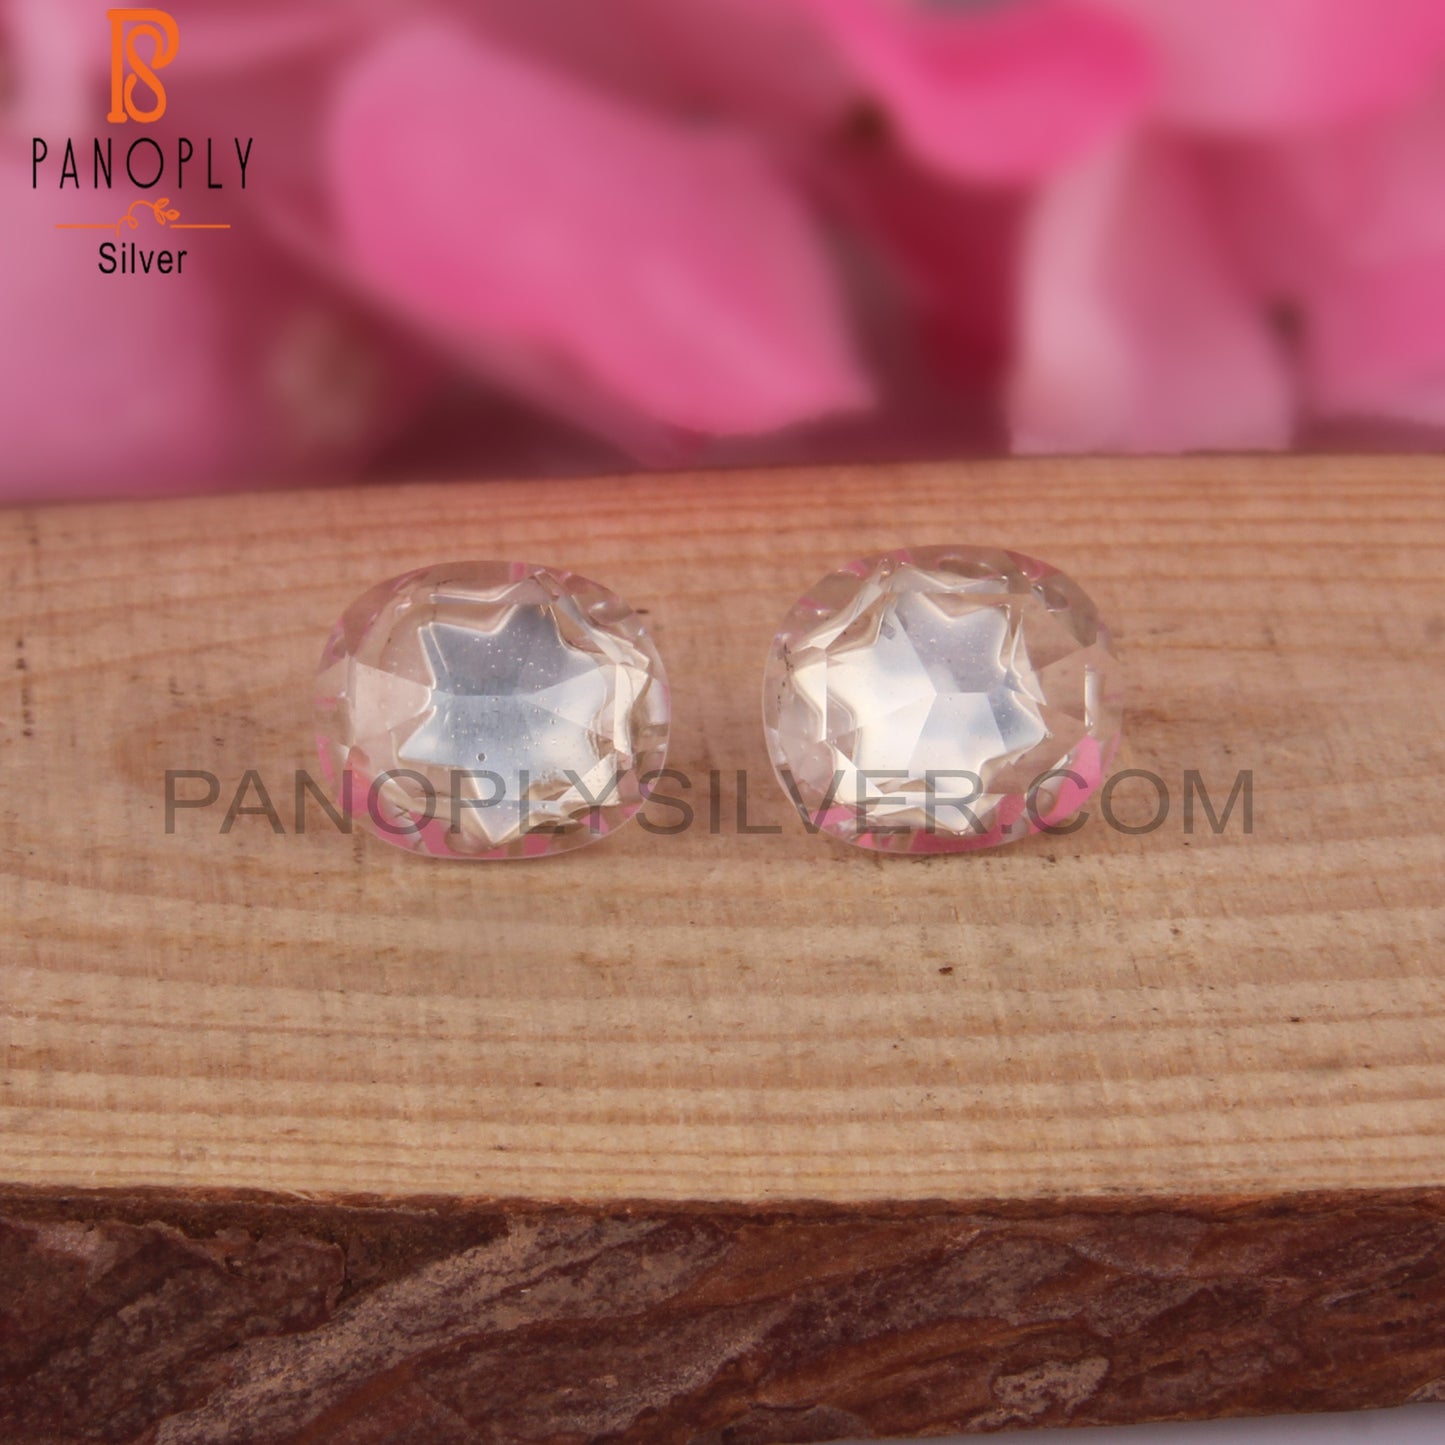 Attractive Crystal Quartz Oval Silver Earrings for Party Wear